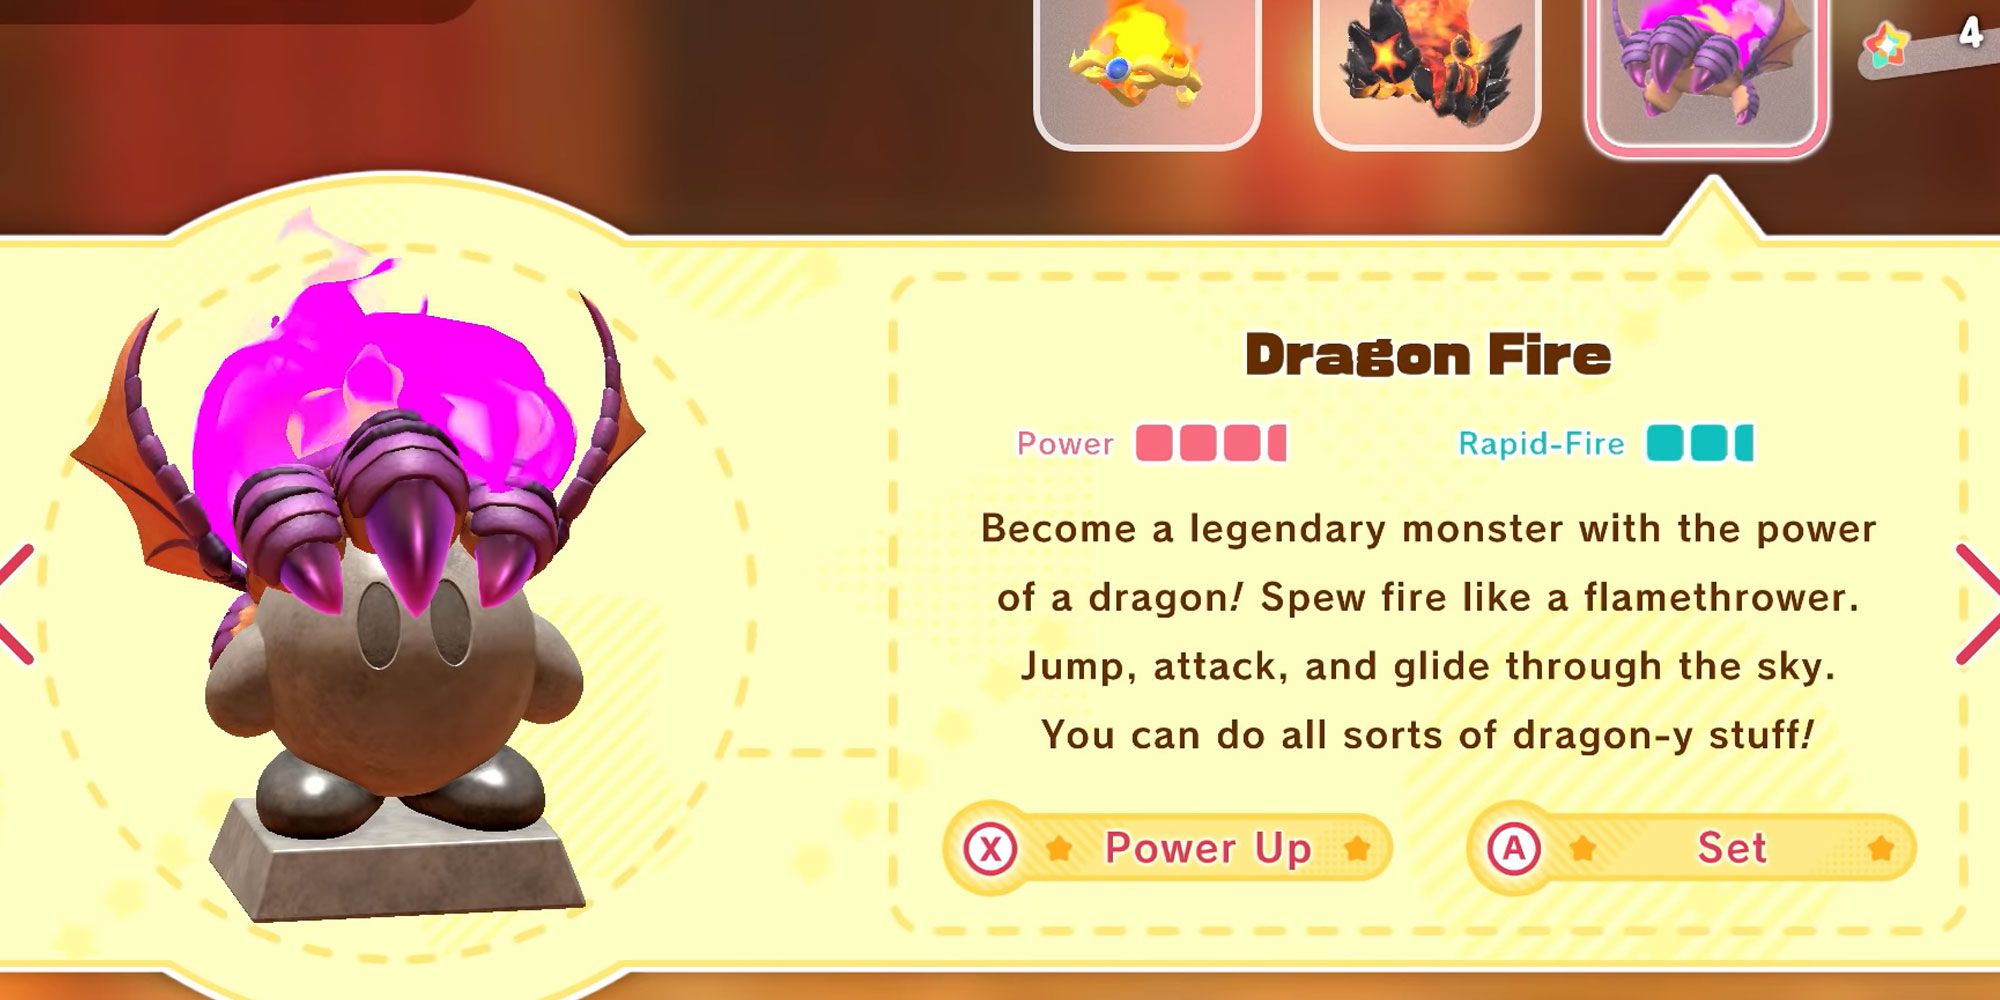 Dragon Fire upgrade for the Fire ability in Kirby and the Forgotten Land